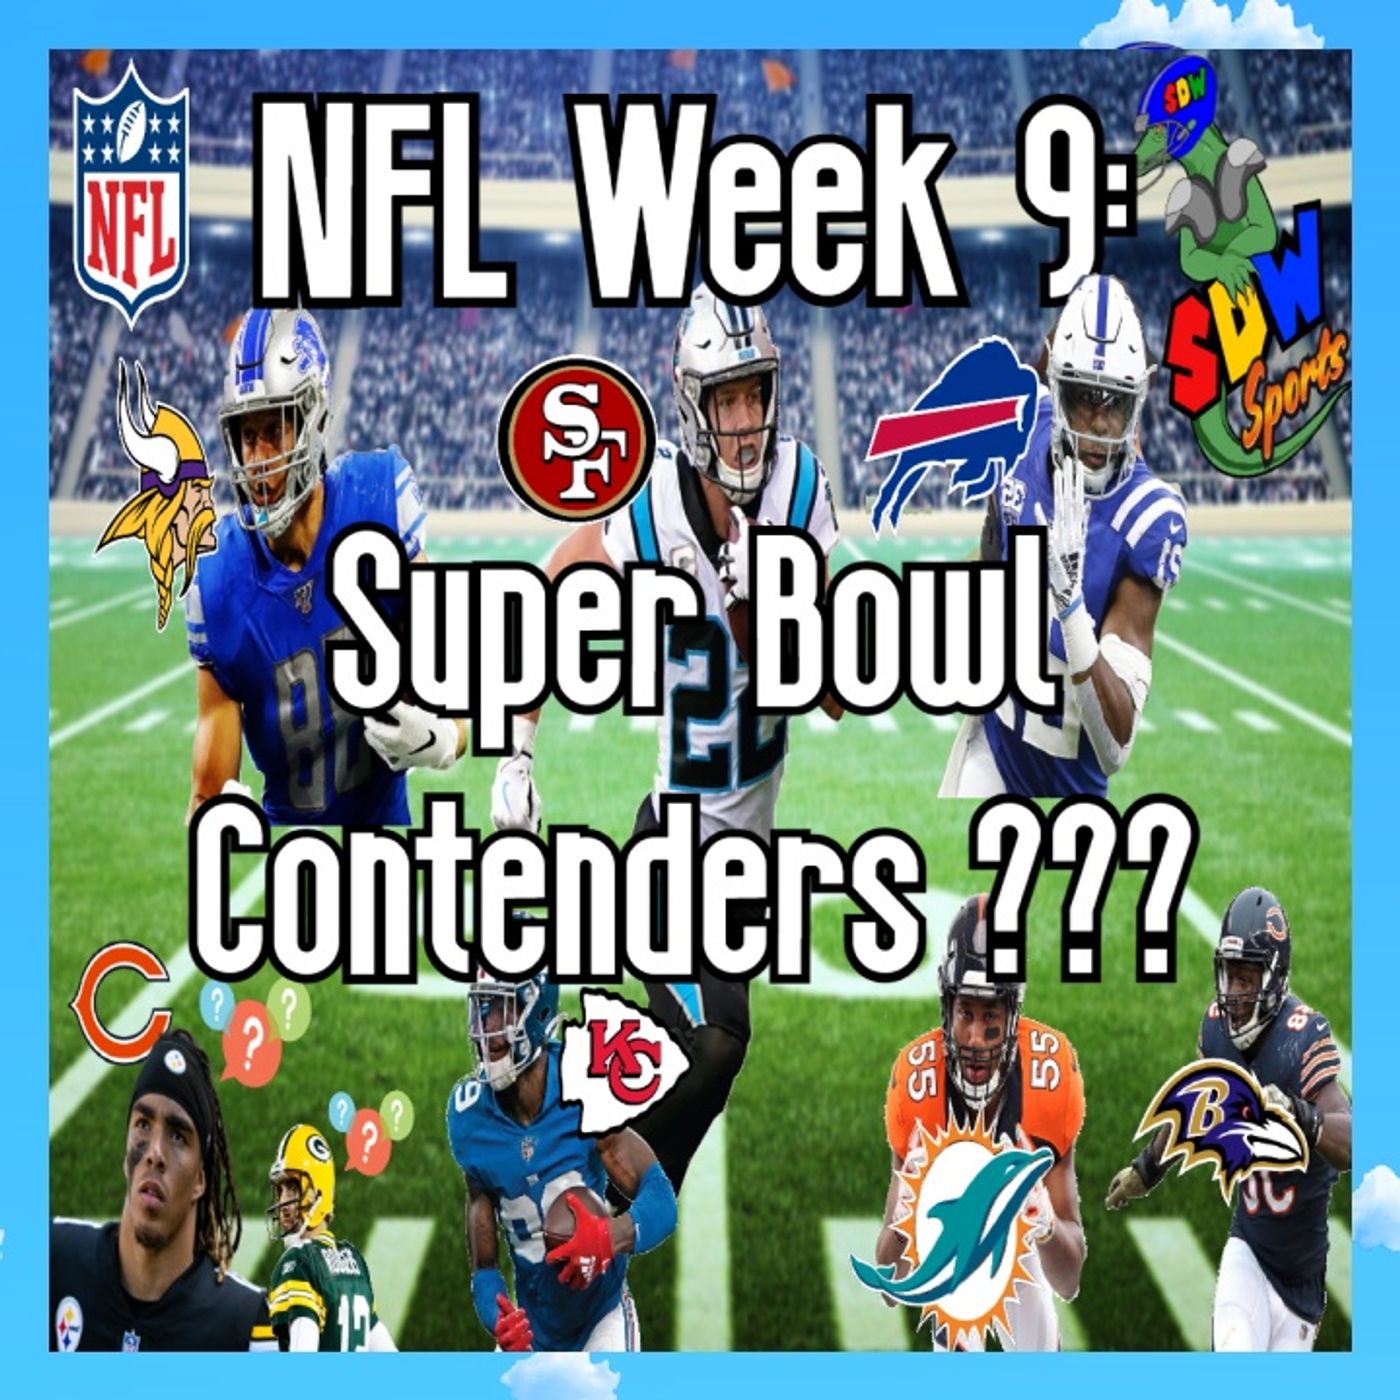 NFL Week 9: Who Are The Real Super Bowl Contenders After The Trade Deadline?